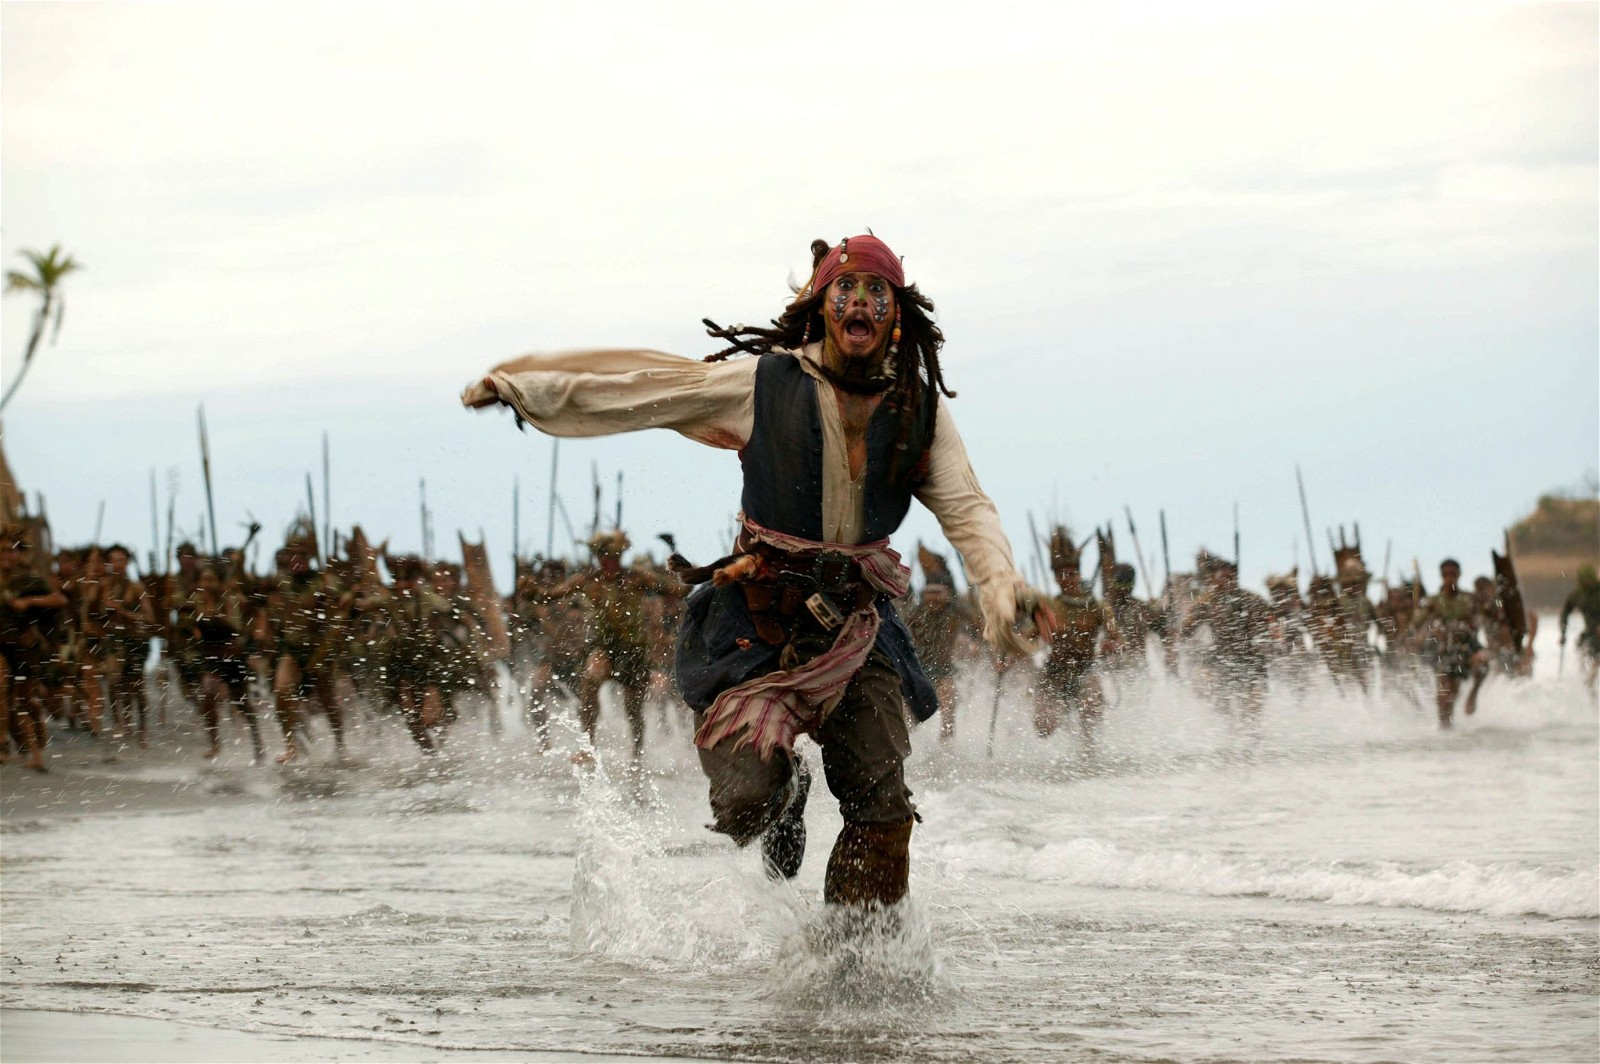 Johnny Depp as Captain Jack Sparrow in the Pirates of the Caribbean franchise.